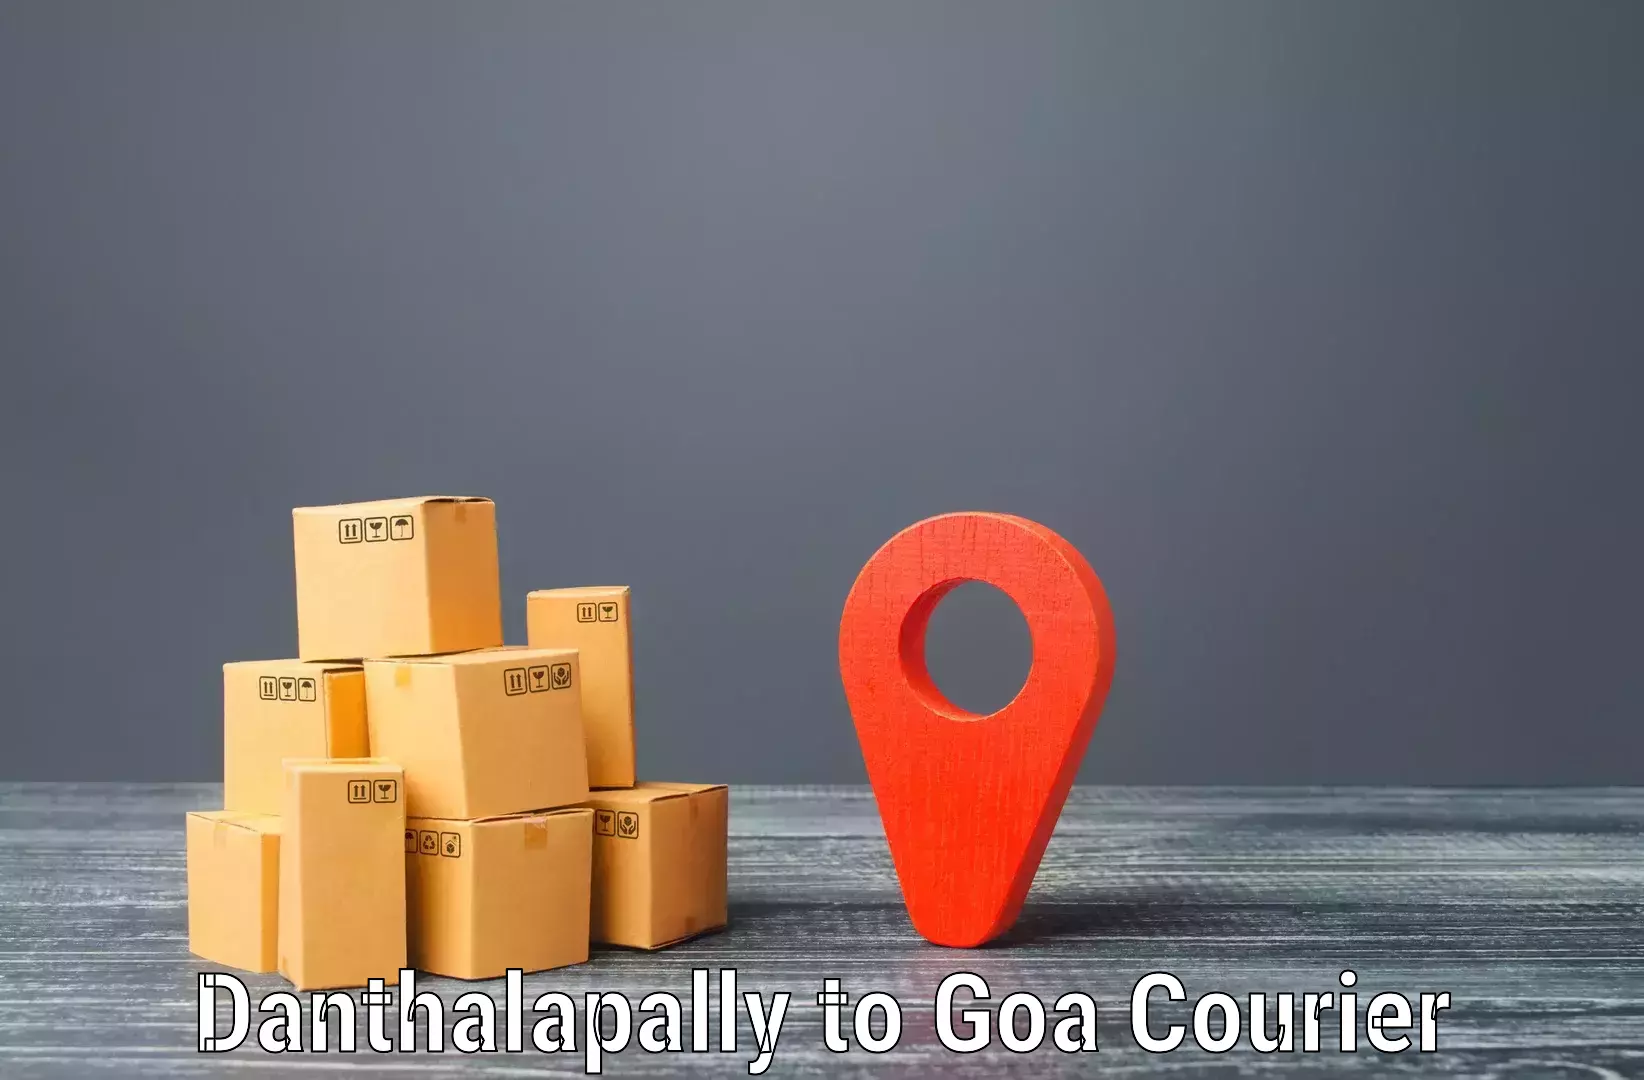 Easy access courier services Danthalapally to Vasco da Gama